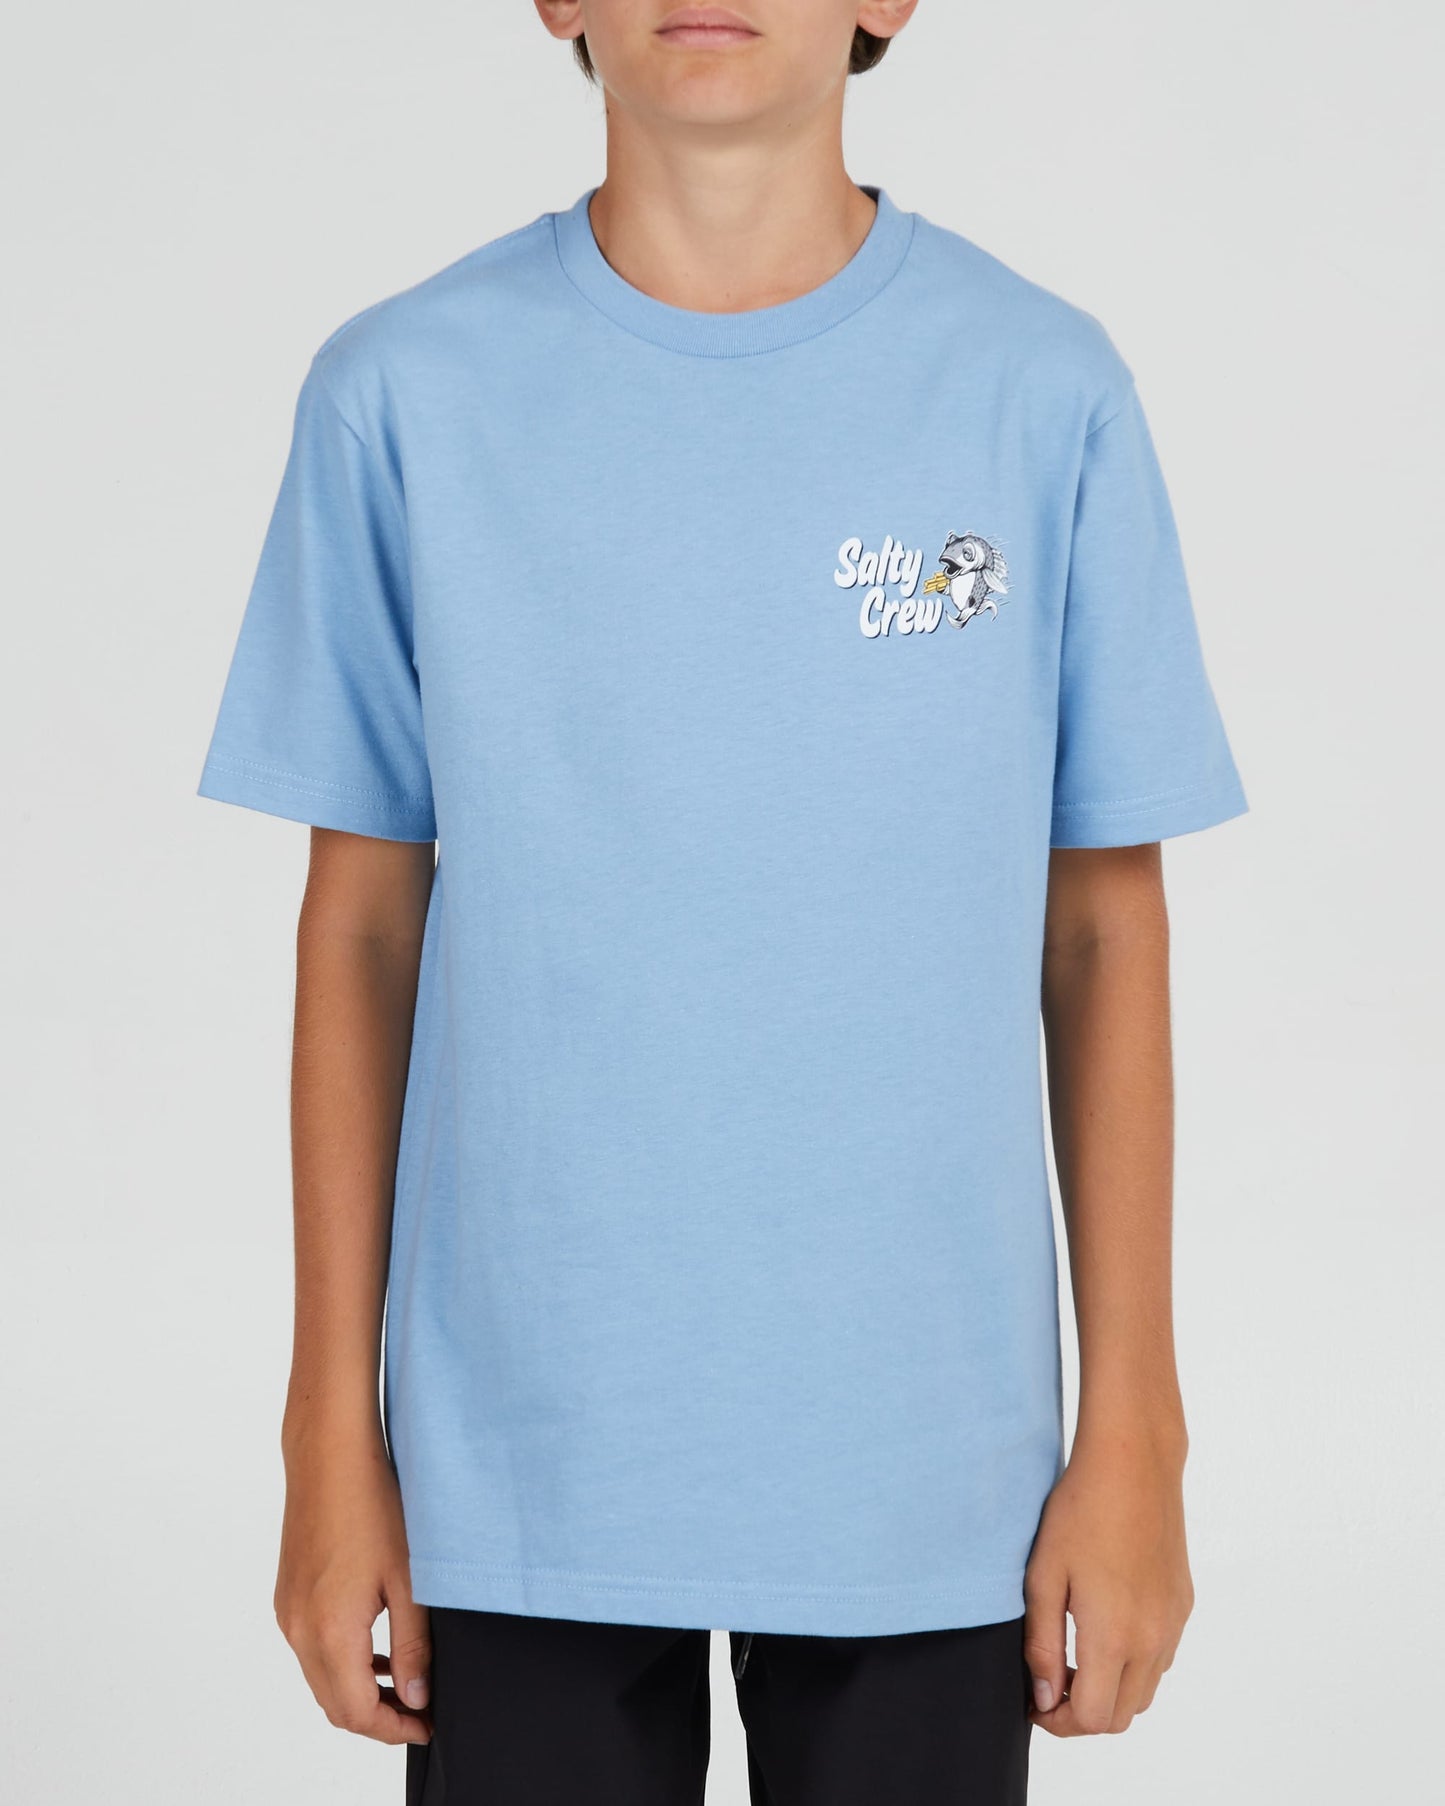 Salty crew T-SHIRTS S/S FISH AND CHIPS BOYS S/S TEE - Marine Blue in Marine Blue